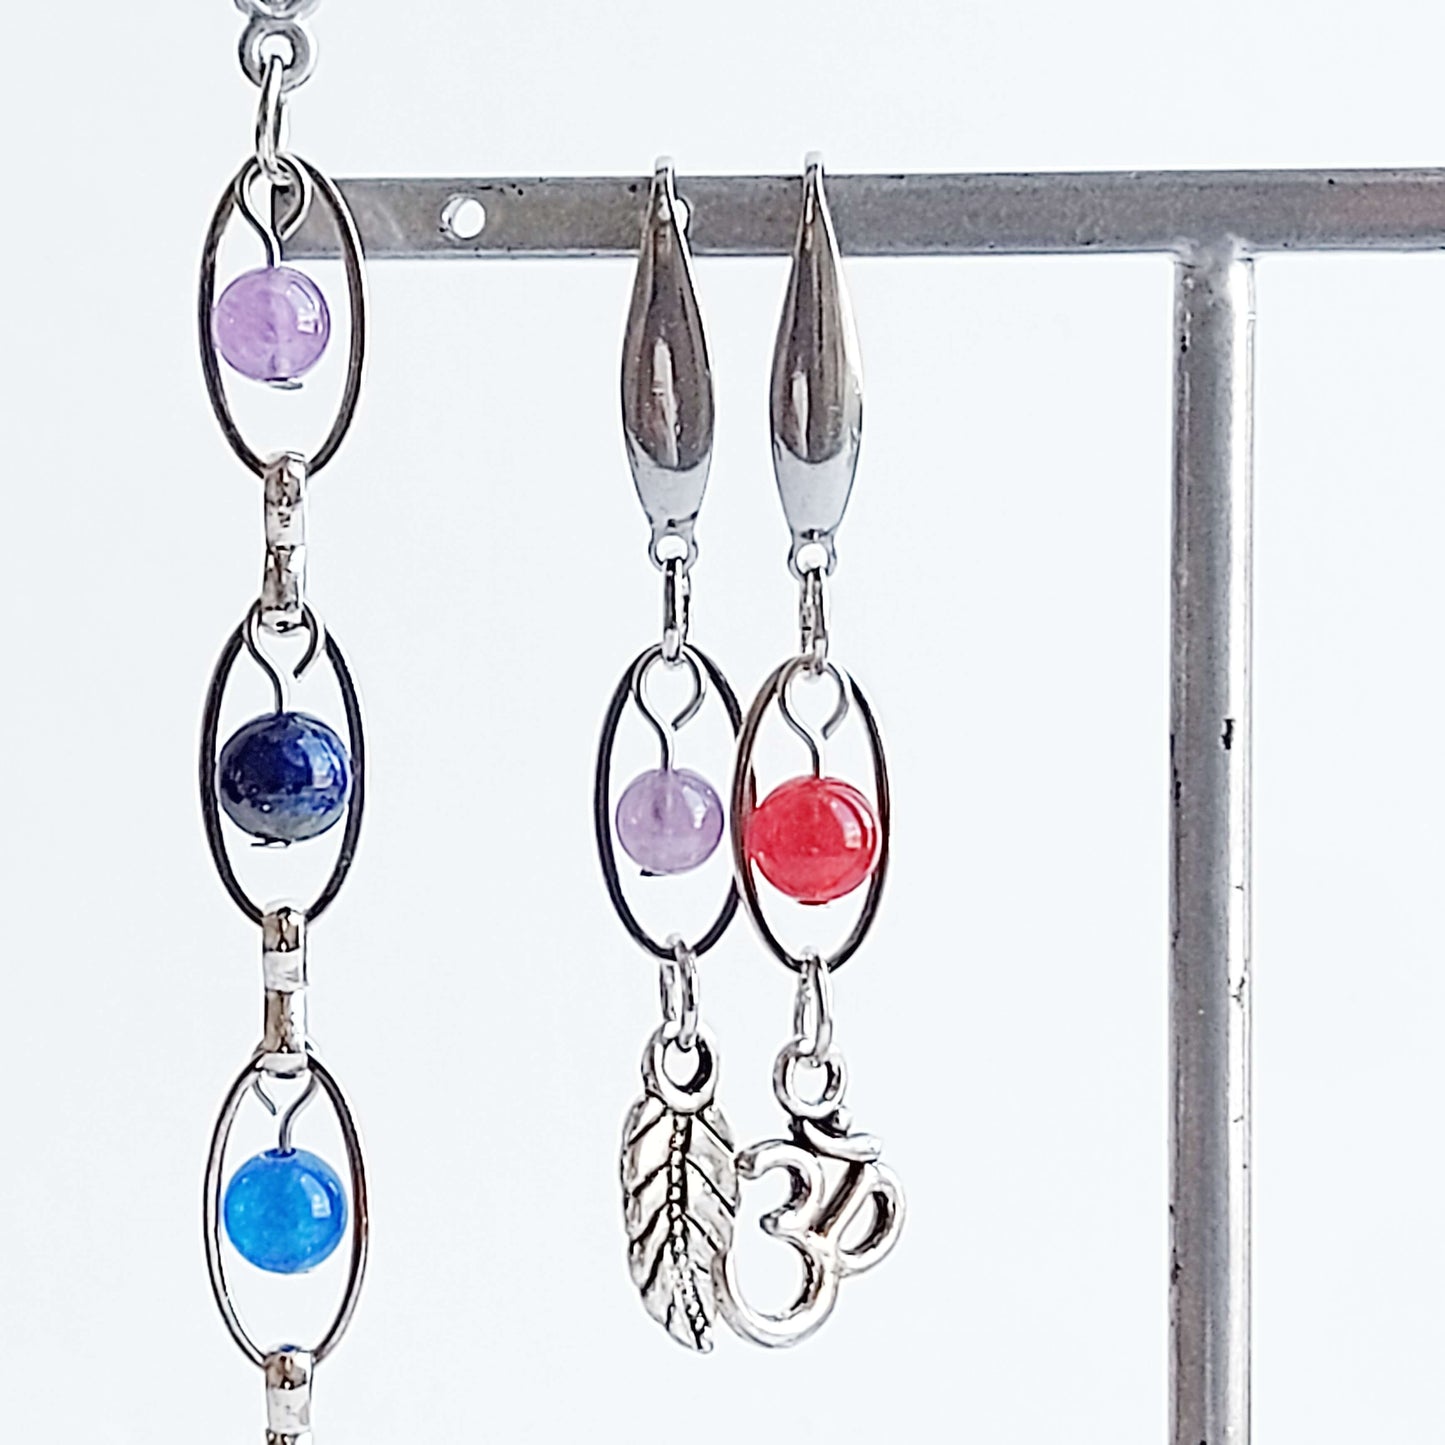 CHAKRA FLOW silver colored set Necklace and Earrings with Jade, Lapis Lazuli, Chevron Amethyst